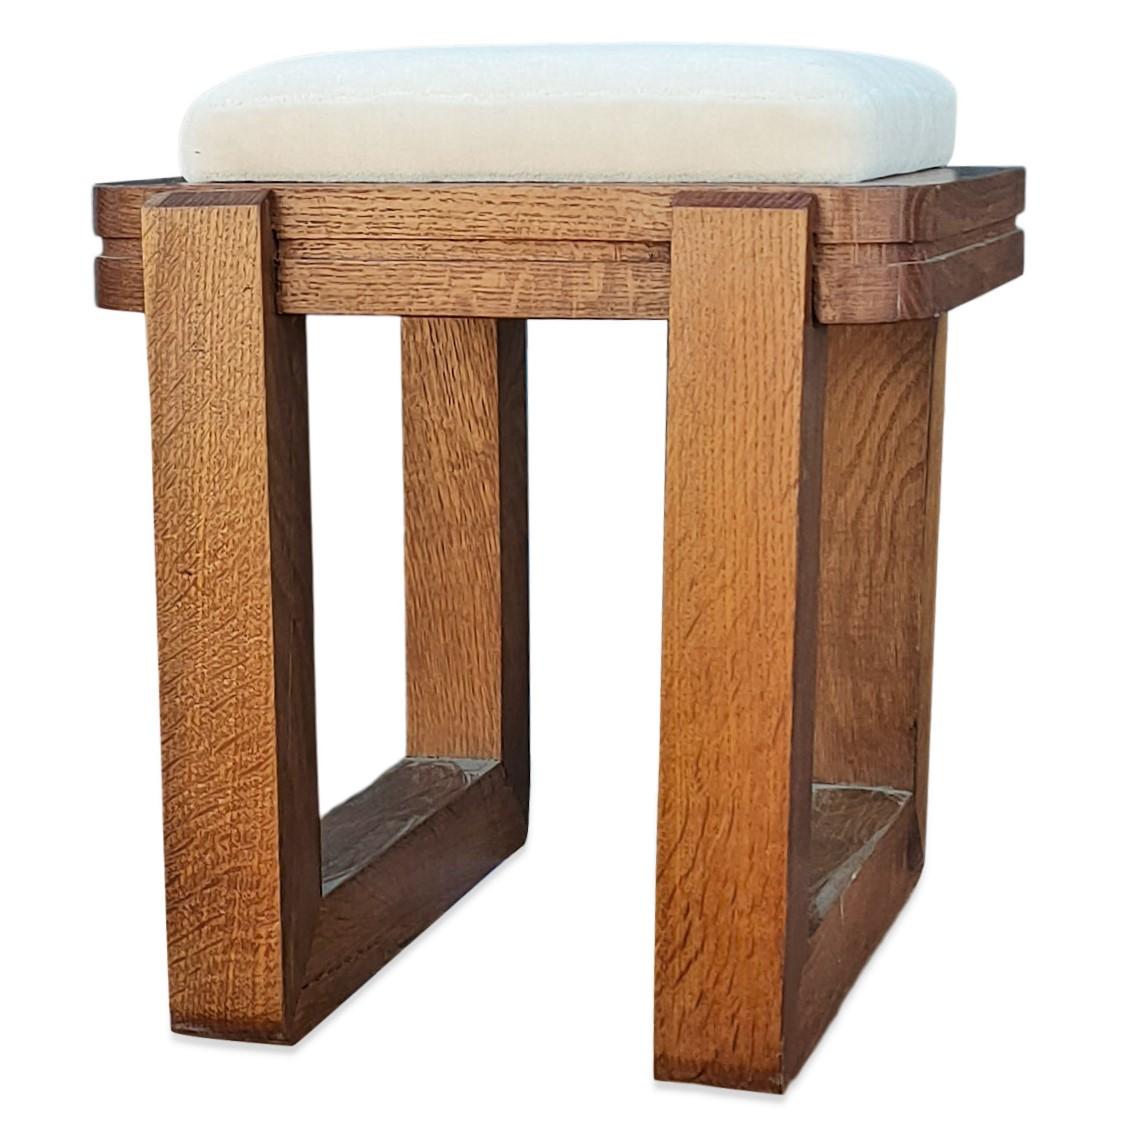 Minimalist solid oak stool 
nice carved details on upper belt
minor repairs on inner side cracks (please see pictures)
fresh cream mohair upholstery
this item will ship from France and can be returned to either France or NYC NY location
price